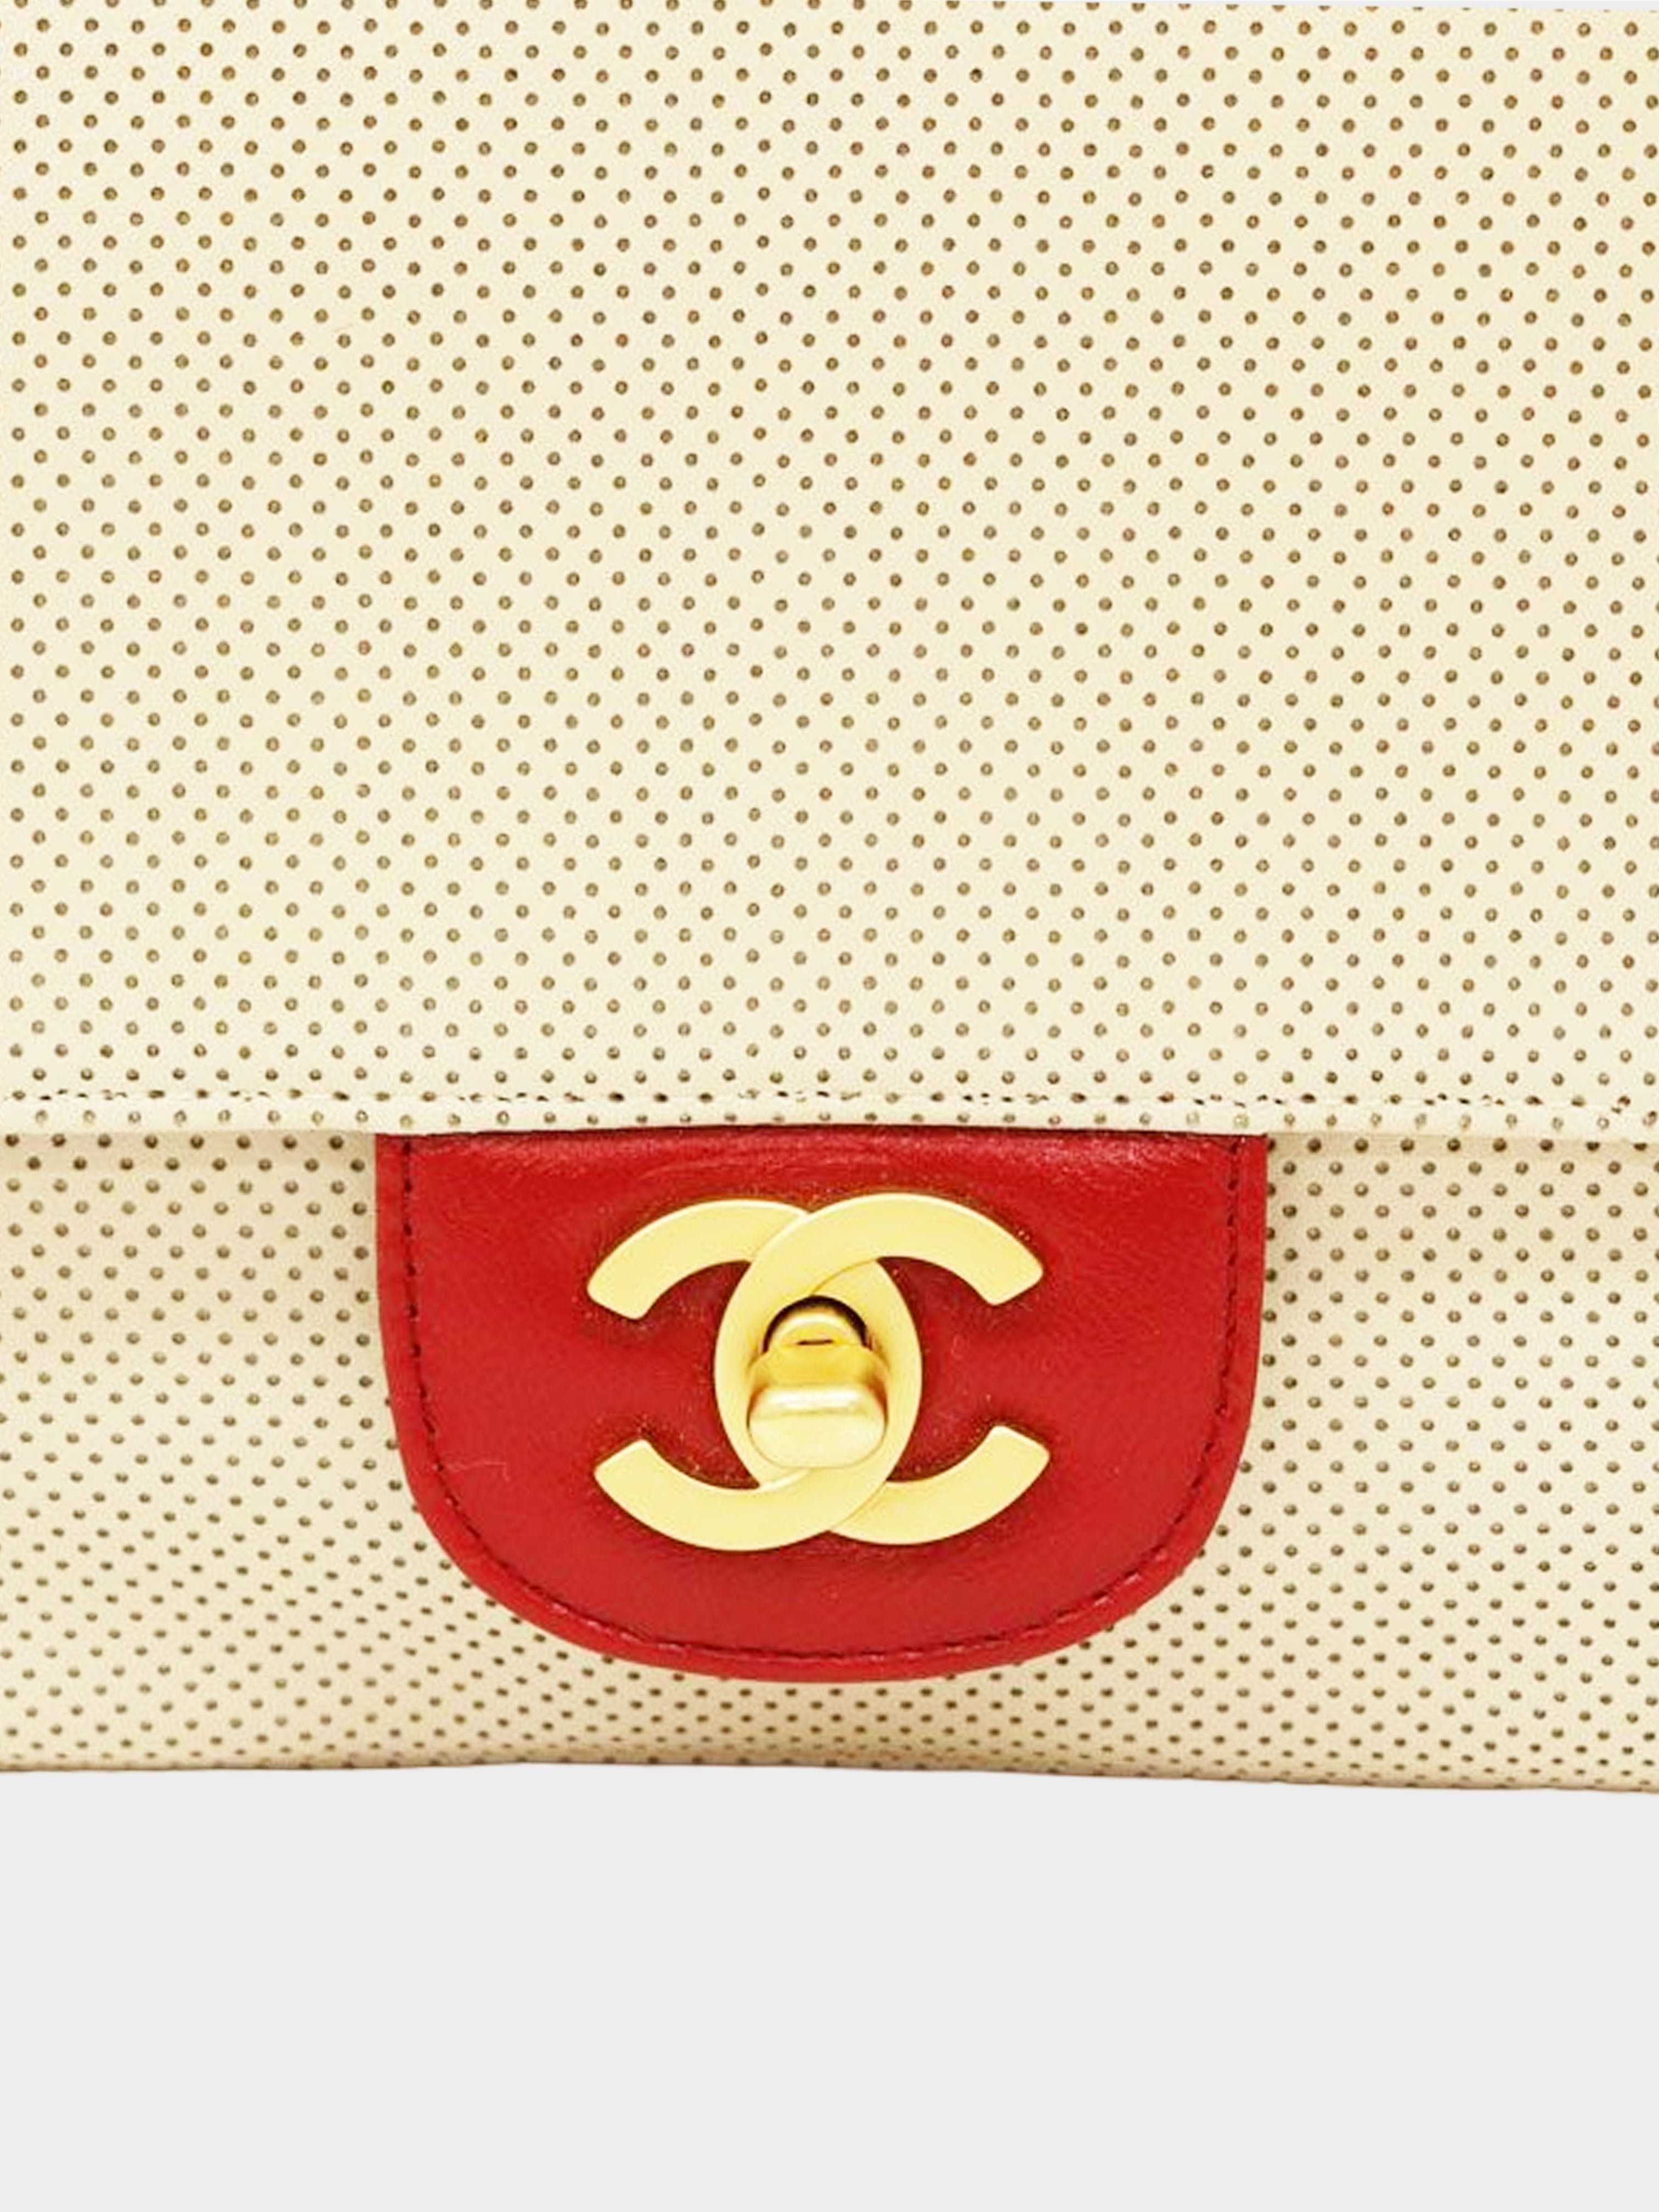 Chanel 2000 Beige and Red Perforated Flap Bag